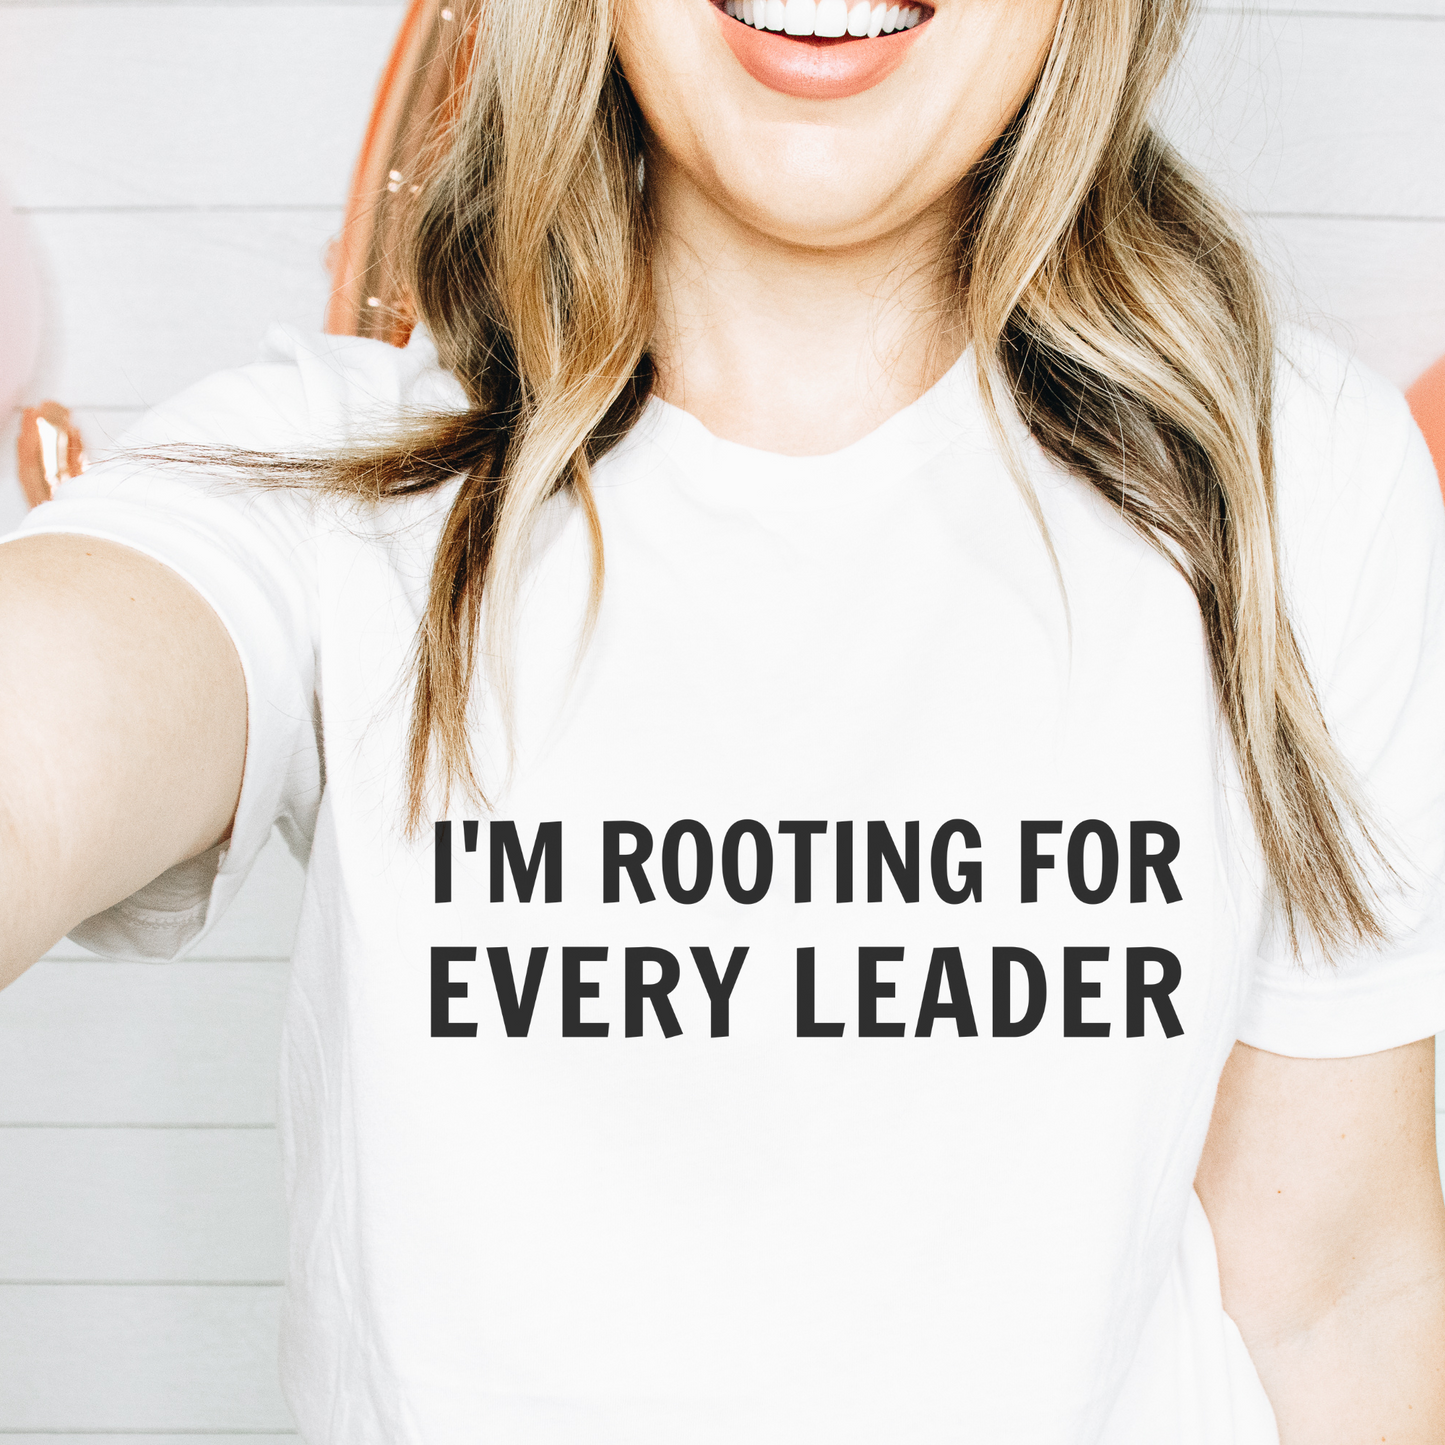 I'm Rooting for Every Leader Appreciation Tshirt, Principal shirt, Best Principal Appreciation Gift, assistant principal shirts